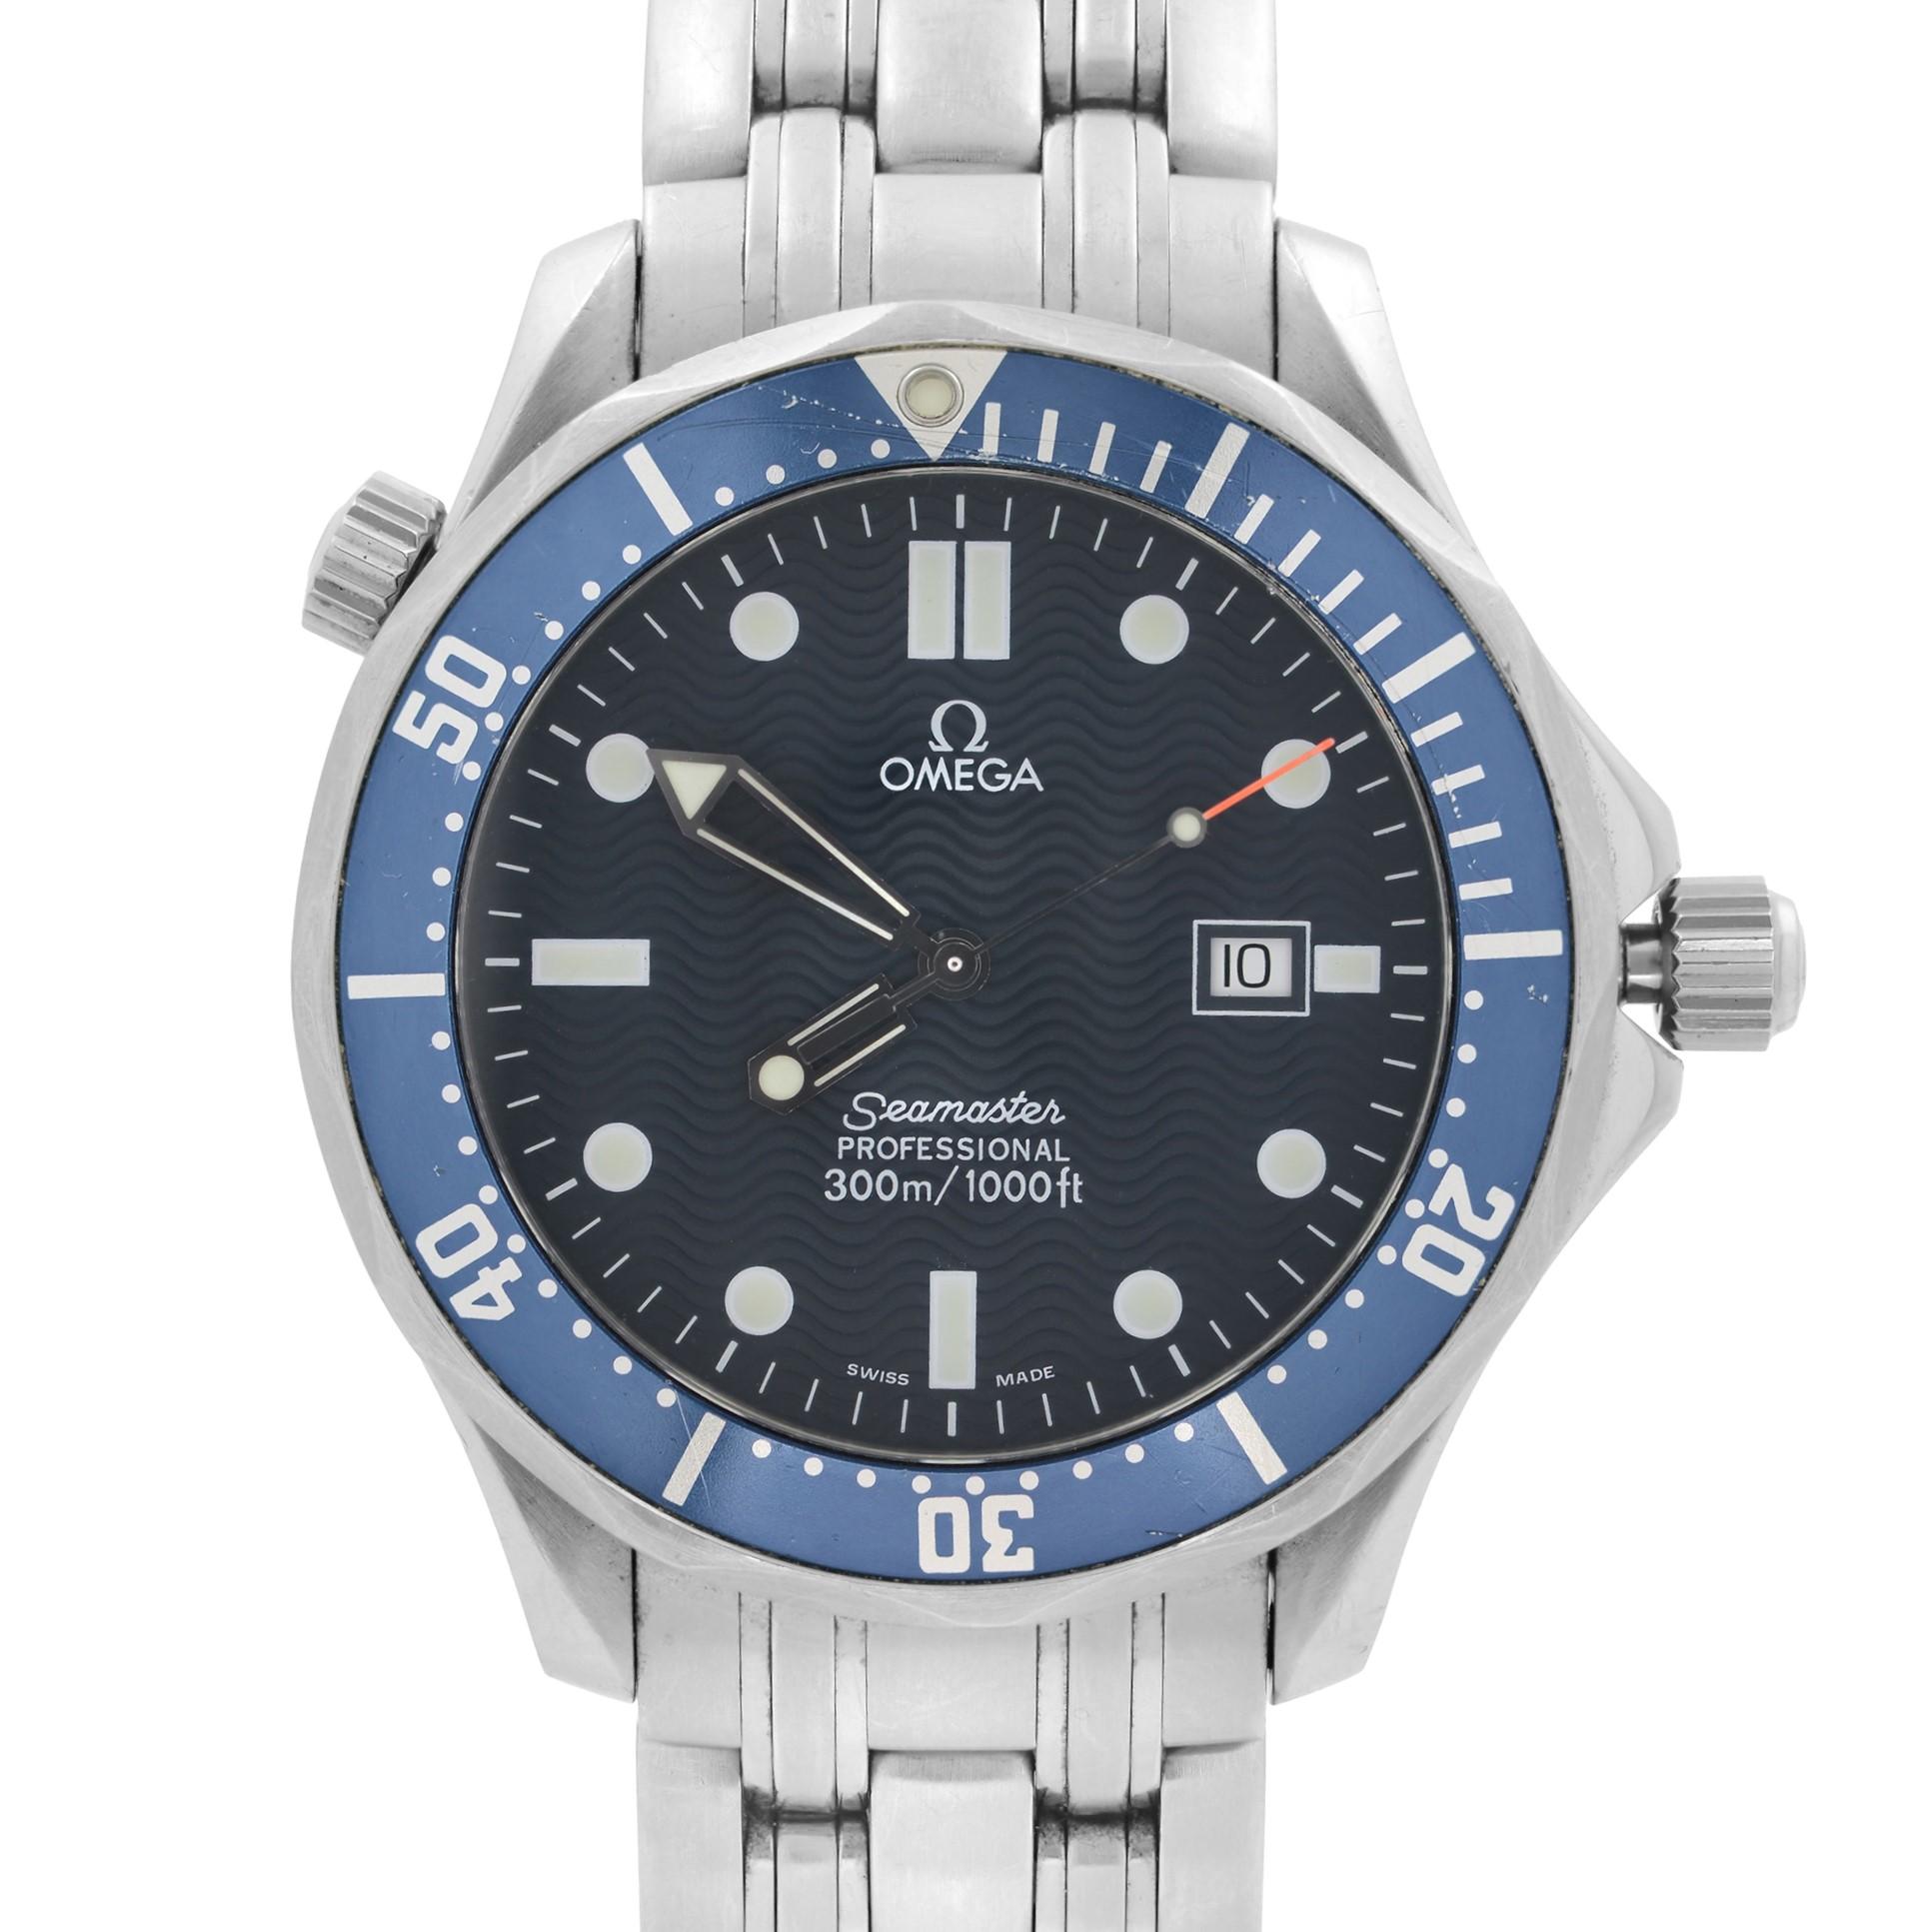 Pre-owned Omega Seamaster 41mm Stainless Steel Blue Wave Dial Quartz Men's Watch 2541.80.00. The Watch Bezel insert shows Significant Deep Scratches and Dents as Seen in the Pictures. No Original Box and Papers are Included. Comes with Chronostore